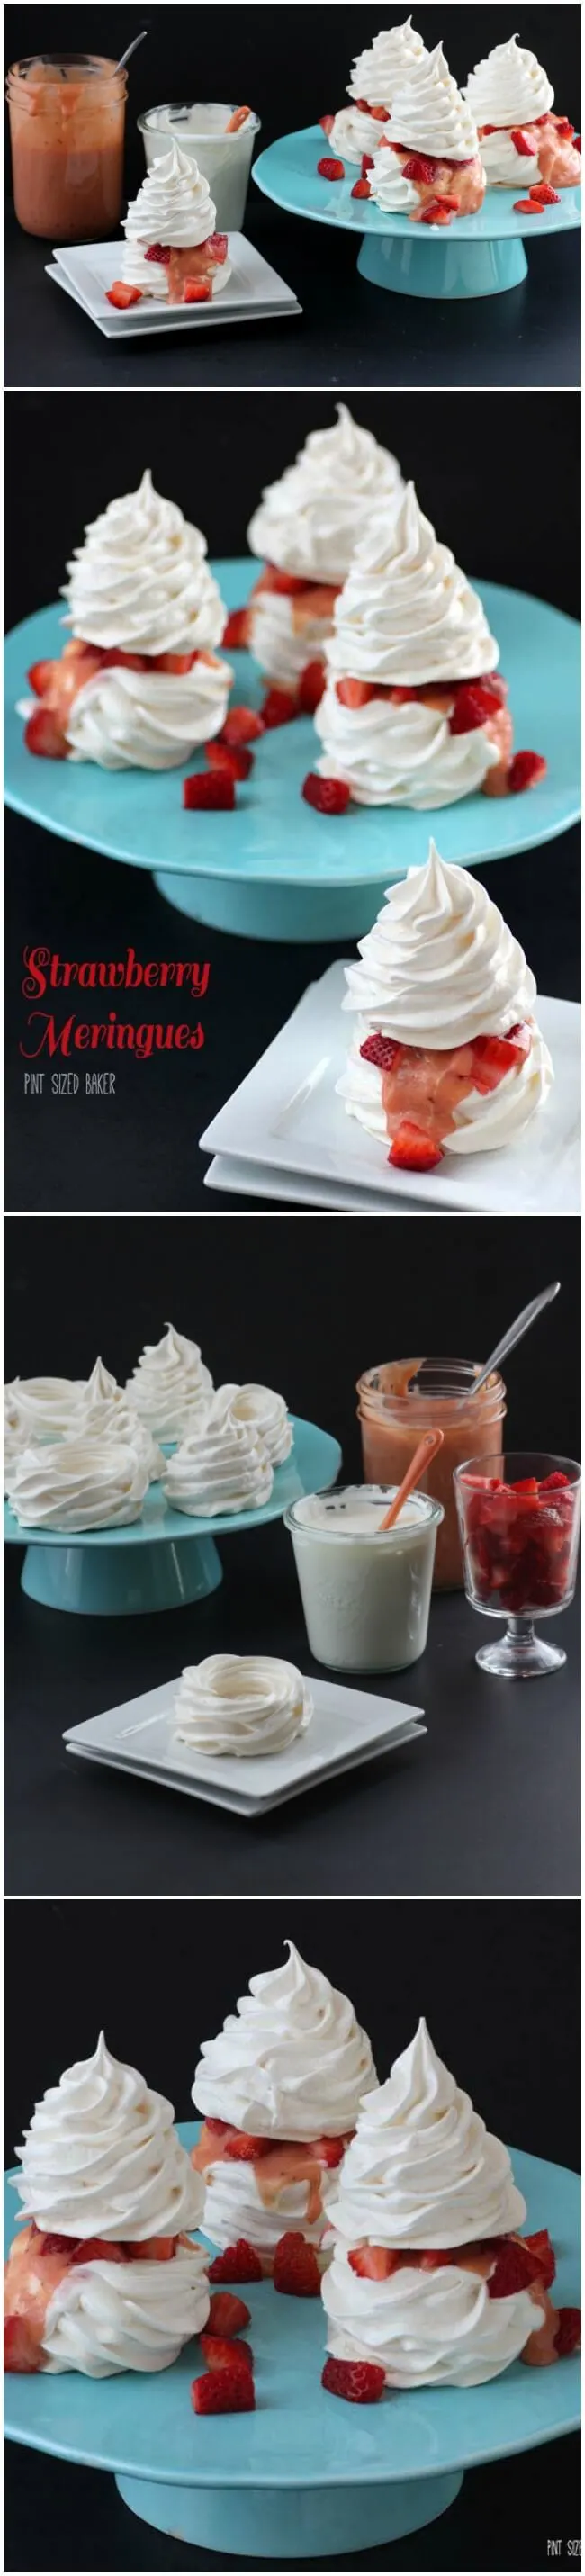 These Strawberry Meringues start off with a meringue shell, get filled with Crème Fraîche and strawberry rhubarb curd and then topped off with fresh strawberries and a meringue top!